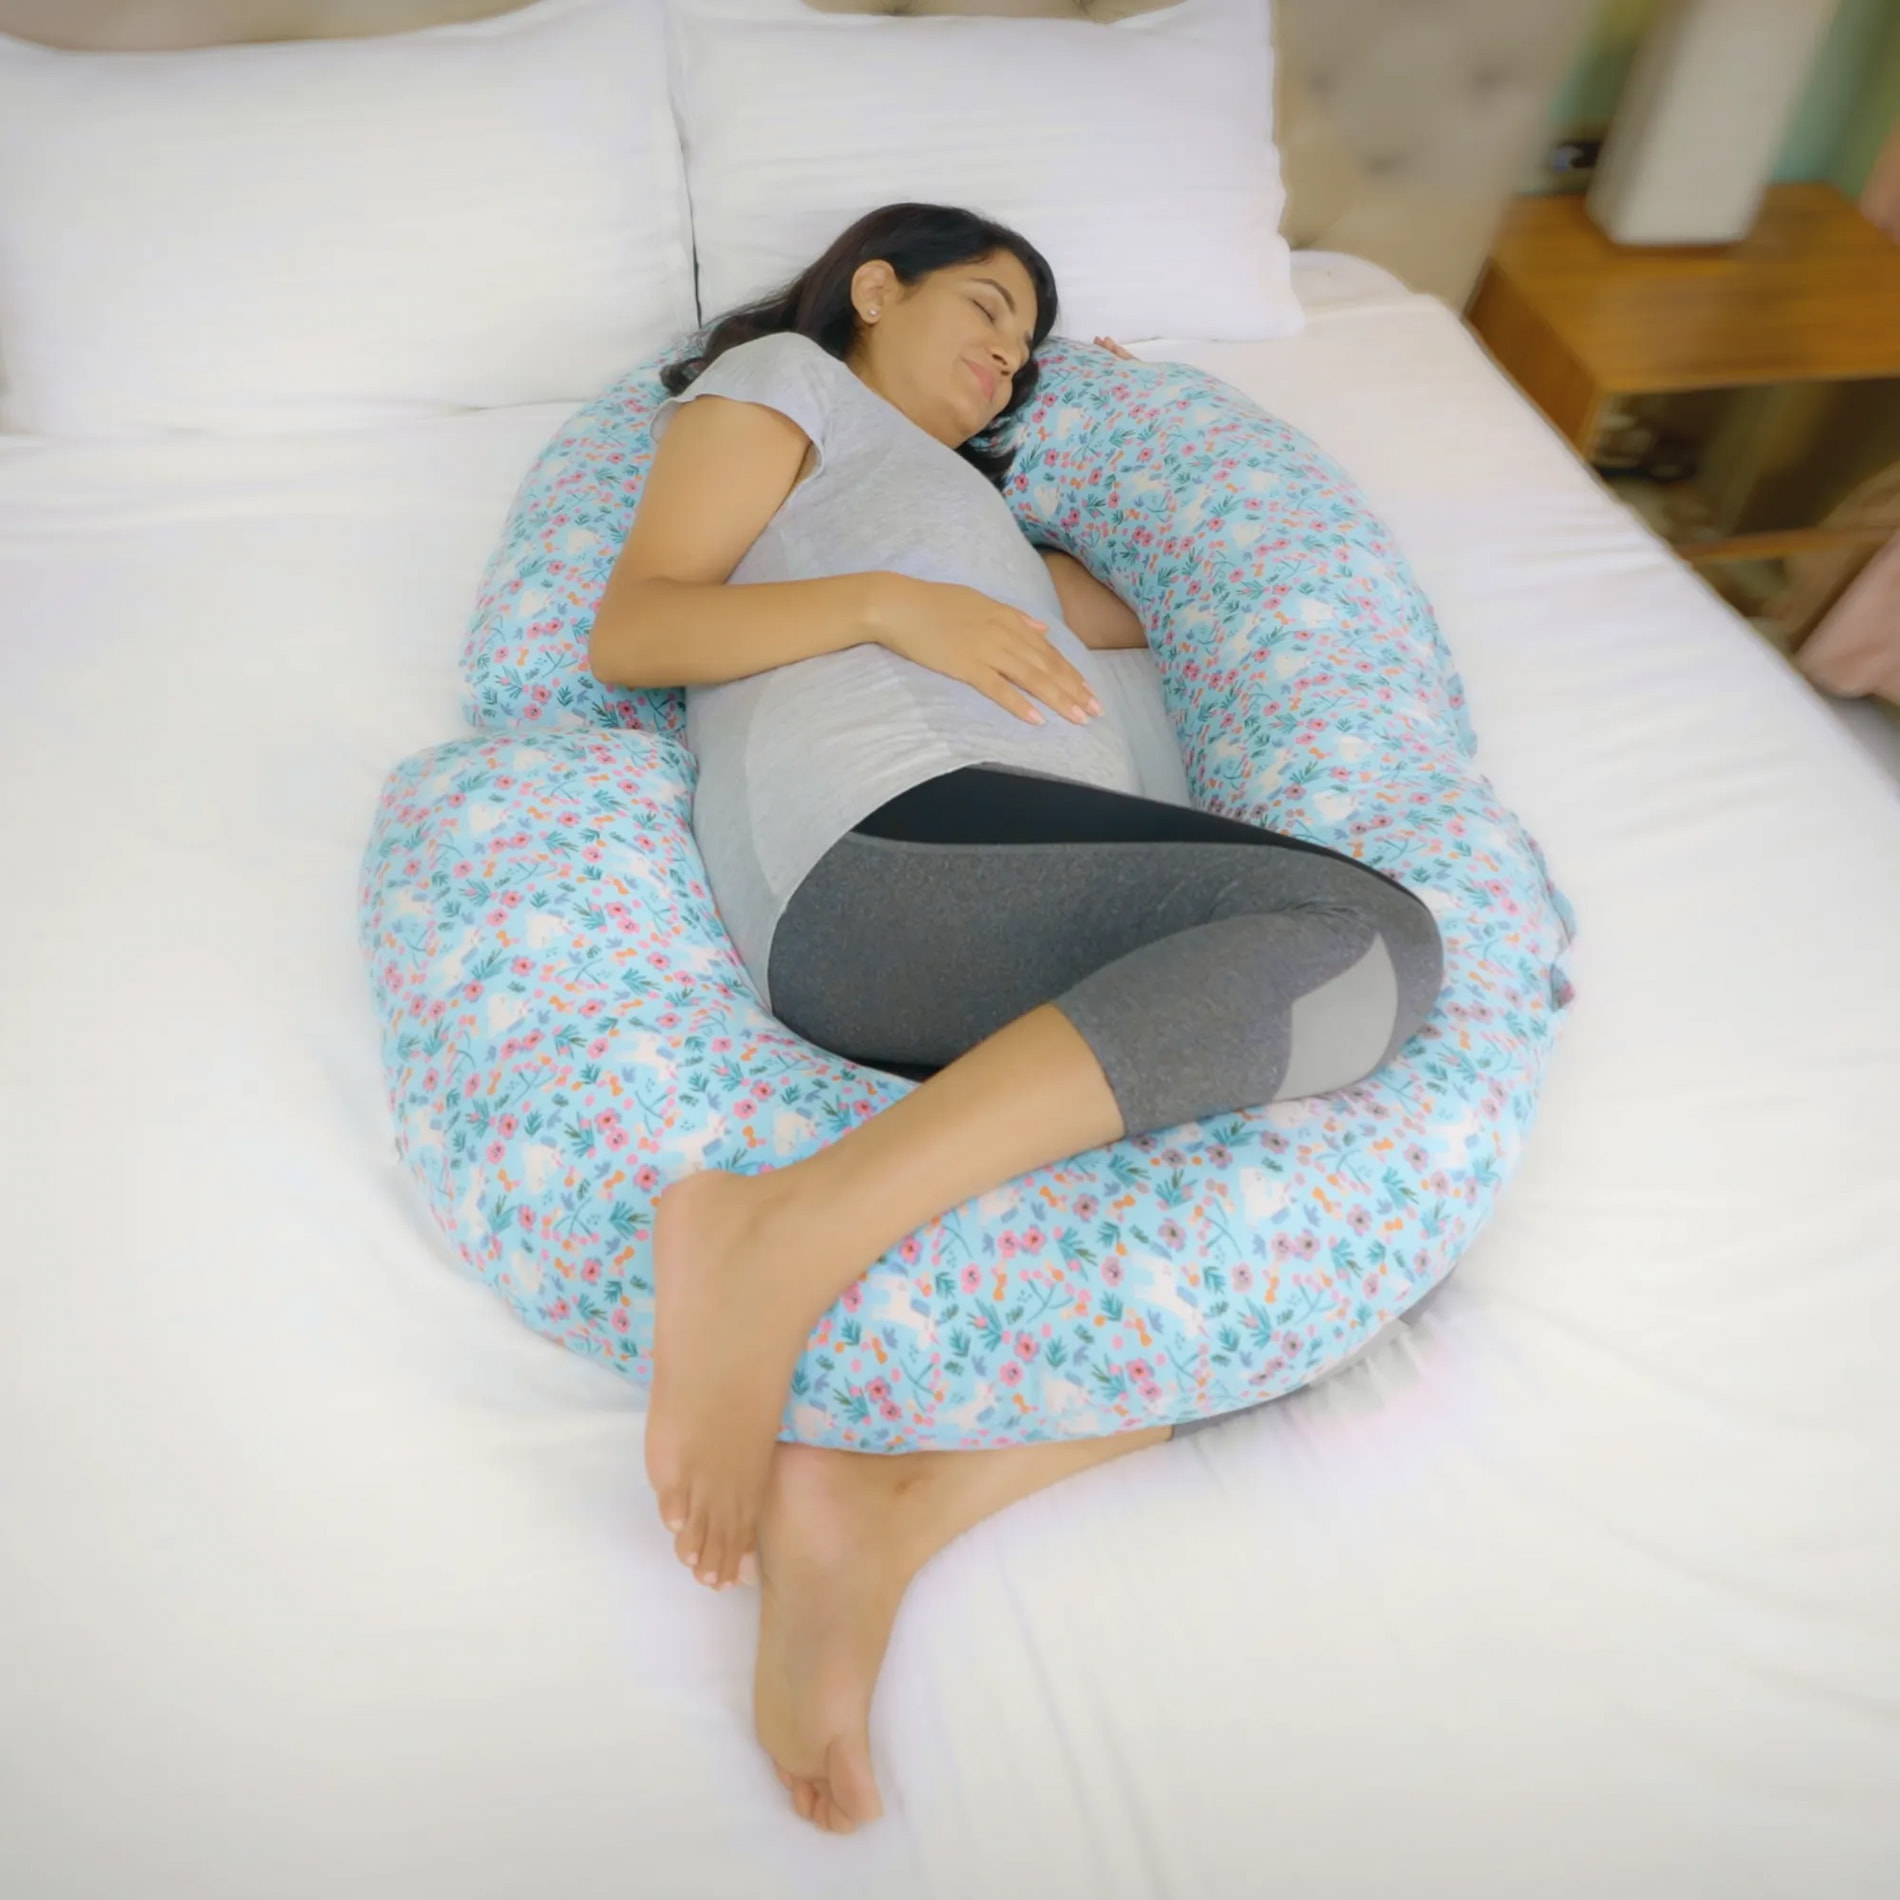 Pregnancy Pillows for Sleeping | Pregnancy Pillow C Shape | Provides Belly Support | Helps Reduce Pressure on Spine | Magical Forest